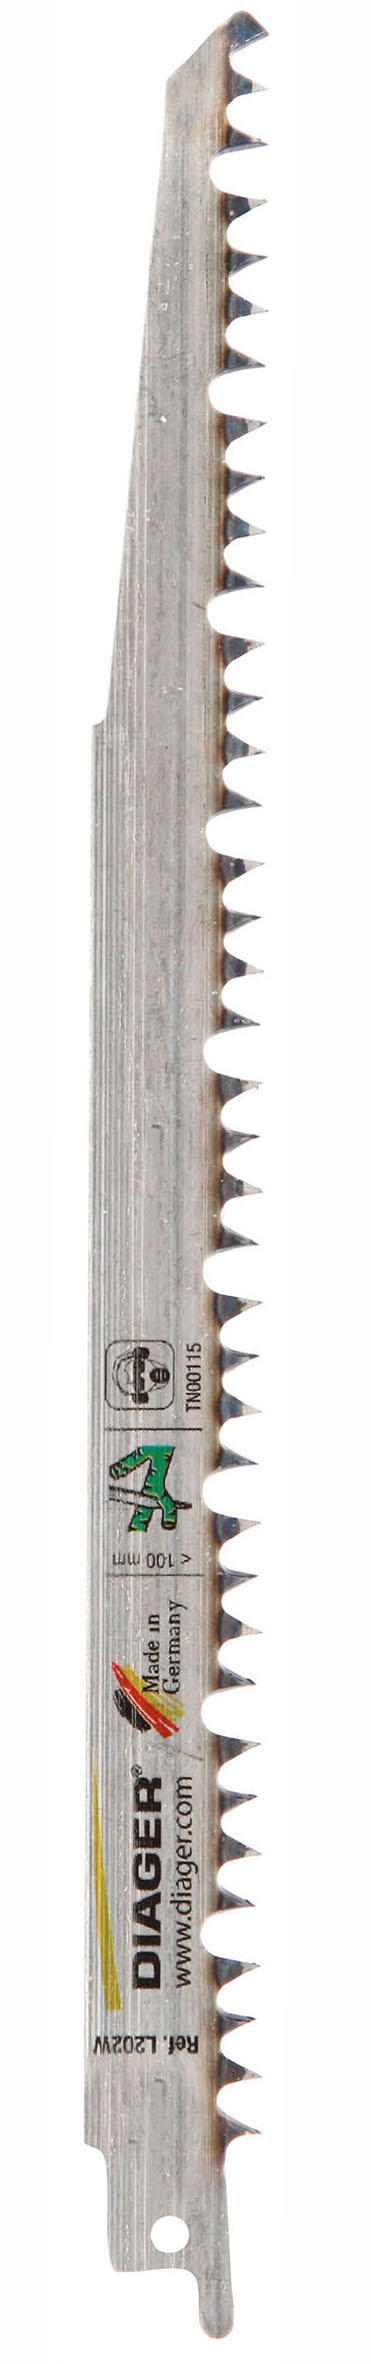 Sawing Green wood Reciprocating saw blade with reinforced teeth - L202W.jpg